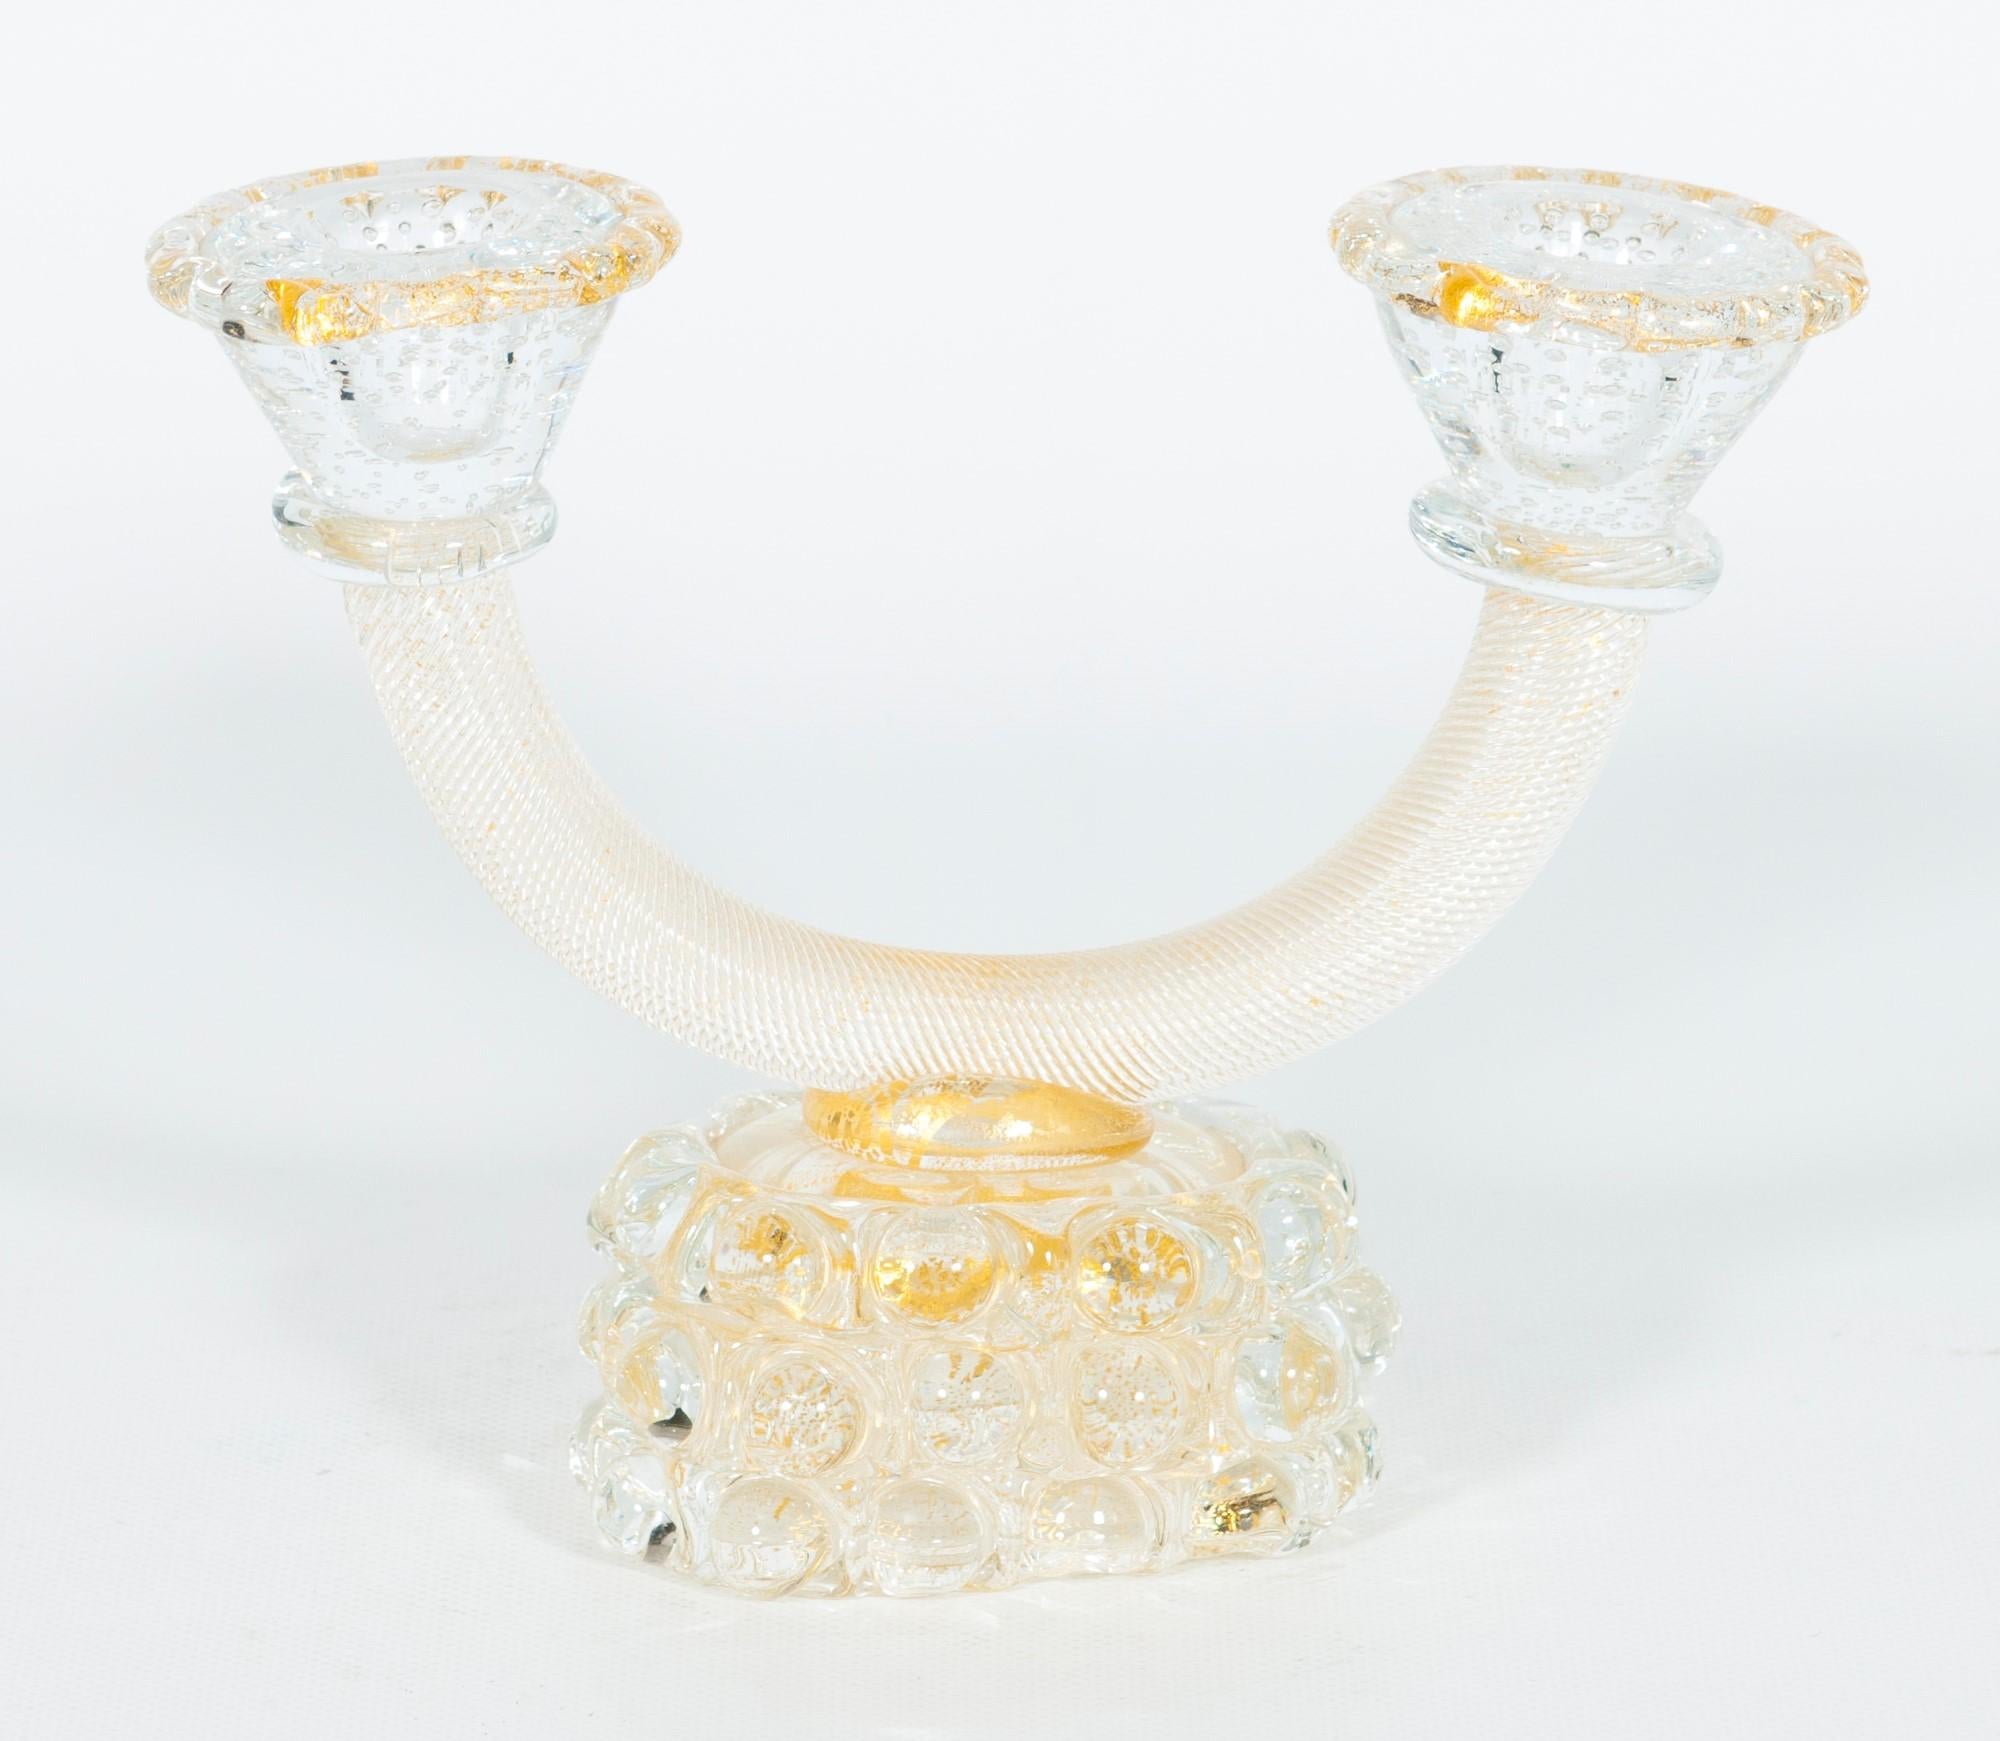 Murano glass Torciglione candle holder with submerged gold attributed to Seguso.
This is a very special artistic candle holder, a masterpiece attributed made by the renowned Murano glassmaker Seguso. 
The 